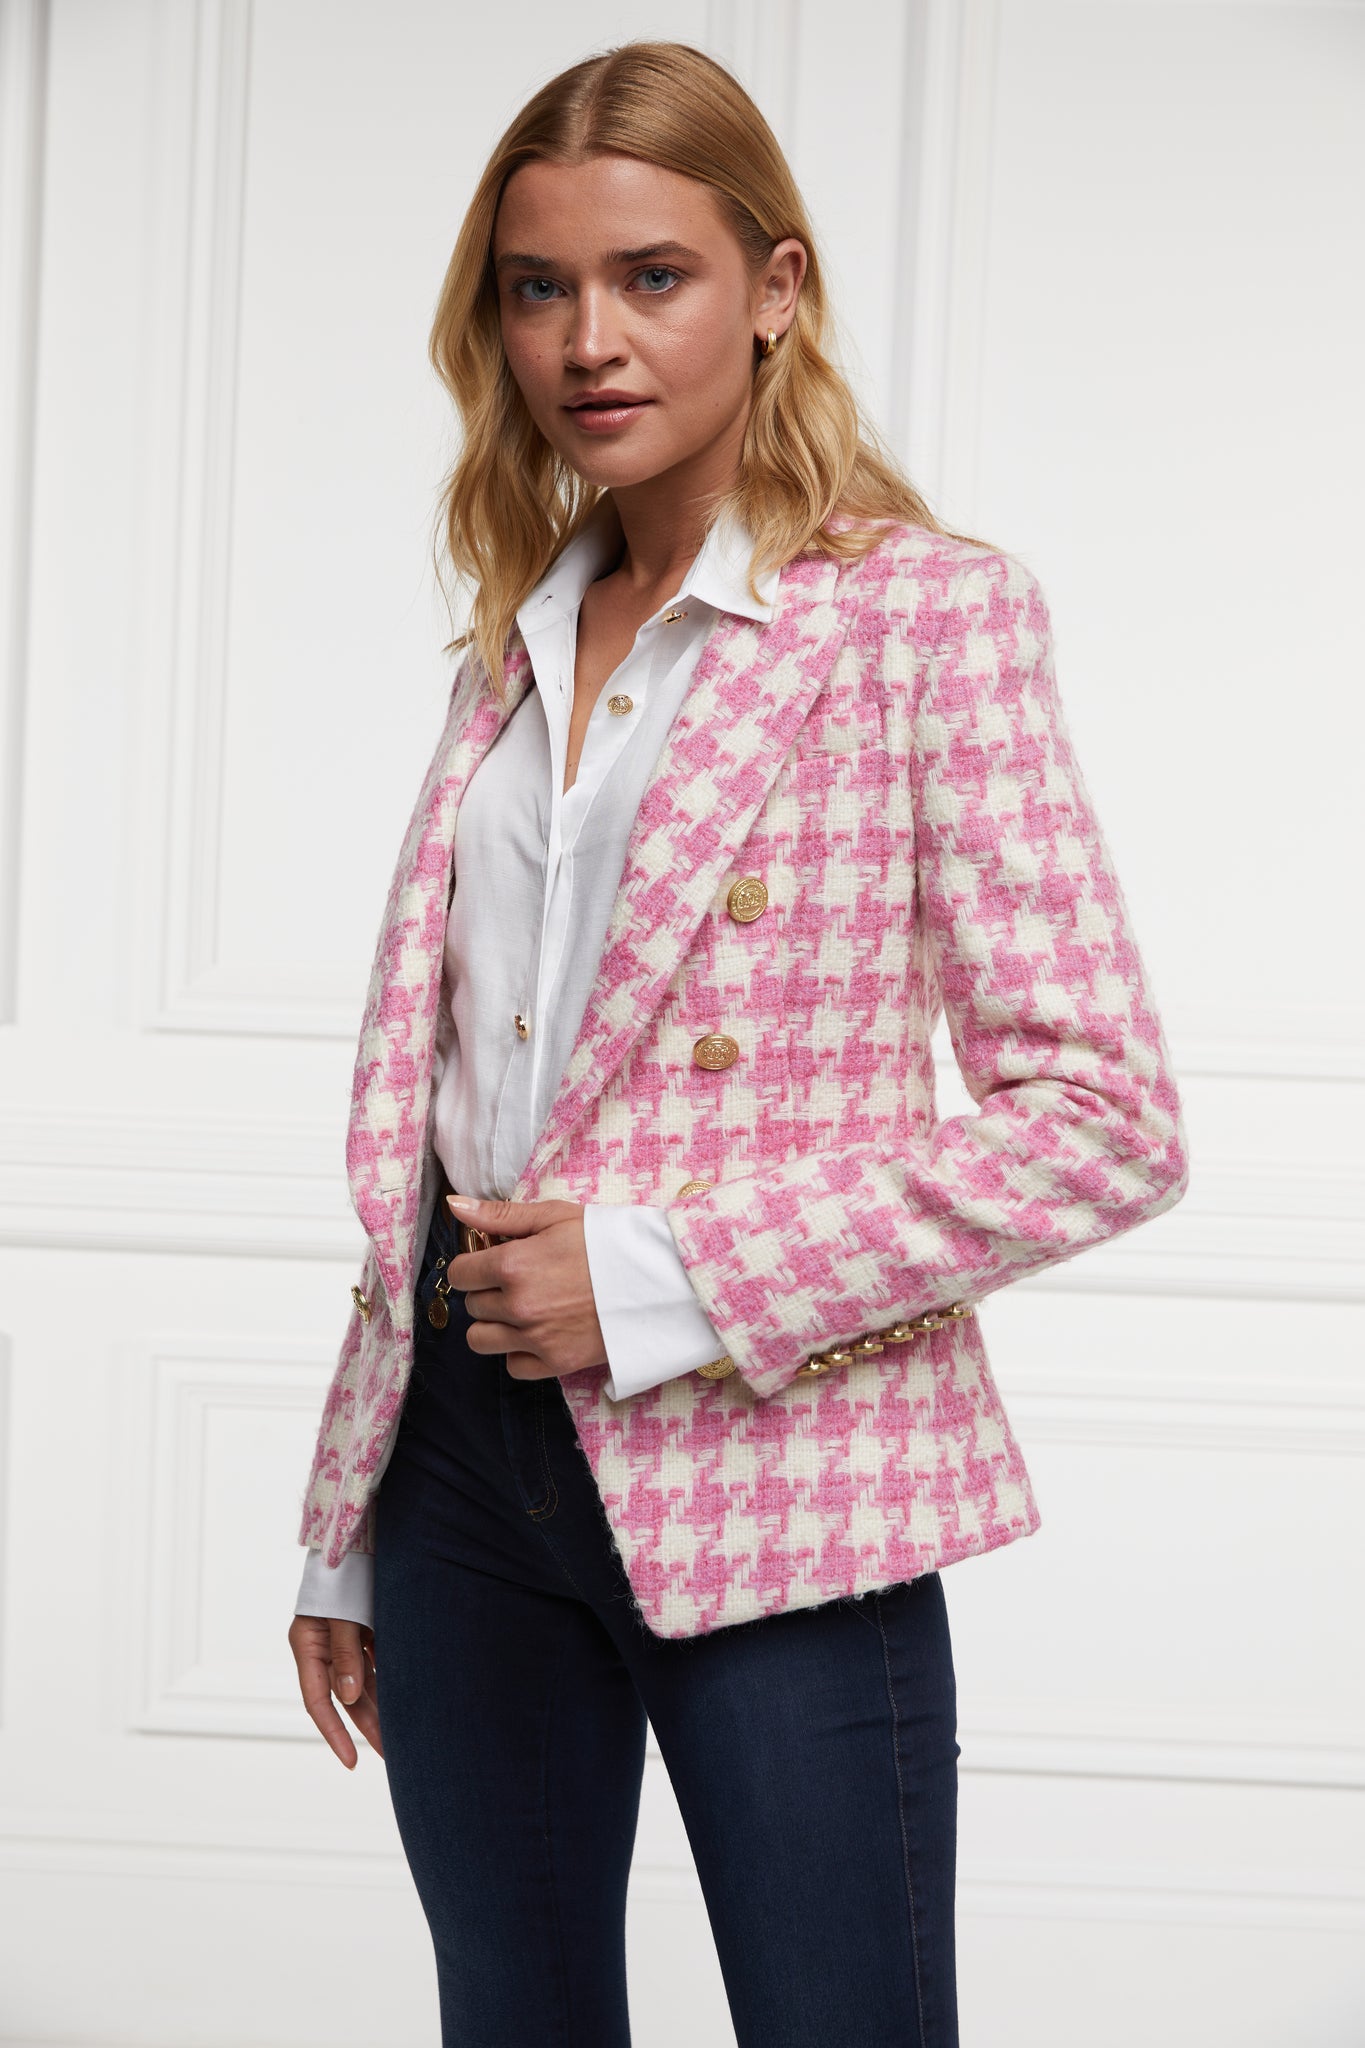 pink and white large scale houndstooth fitted blazer double breasted style but with only single button fastening to the one central button for more form fitted tailored look finished with two pockets at hips and gold button details on front and cuffs